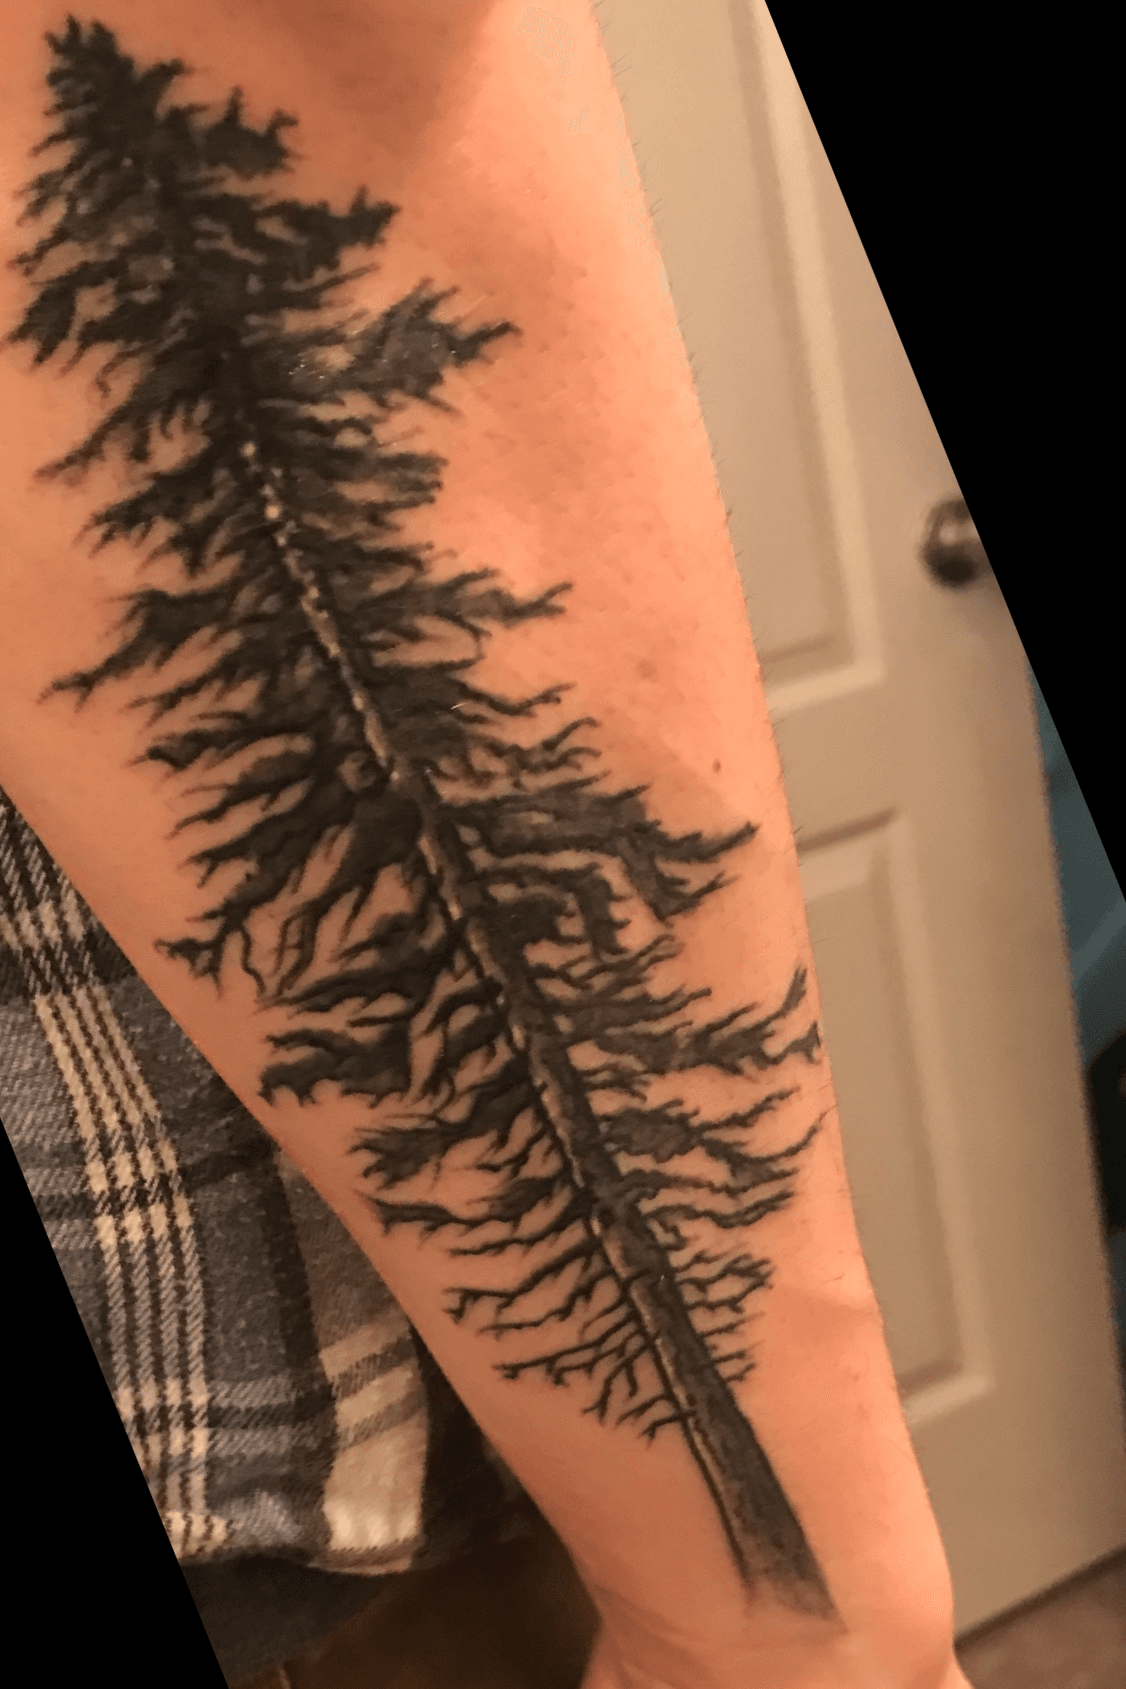 Redwood Tree Tattoos Symbolism Meanings  More